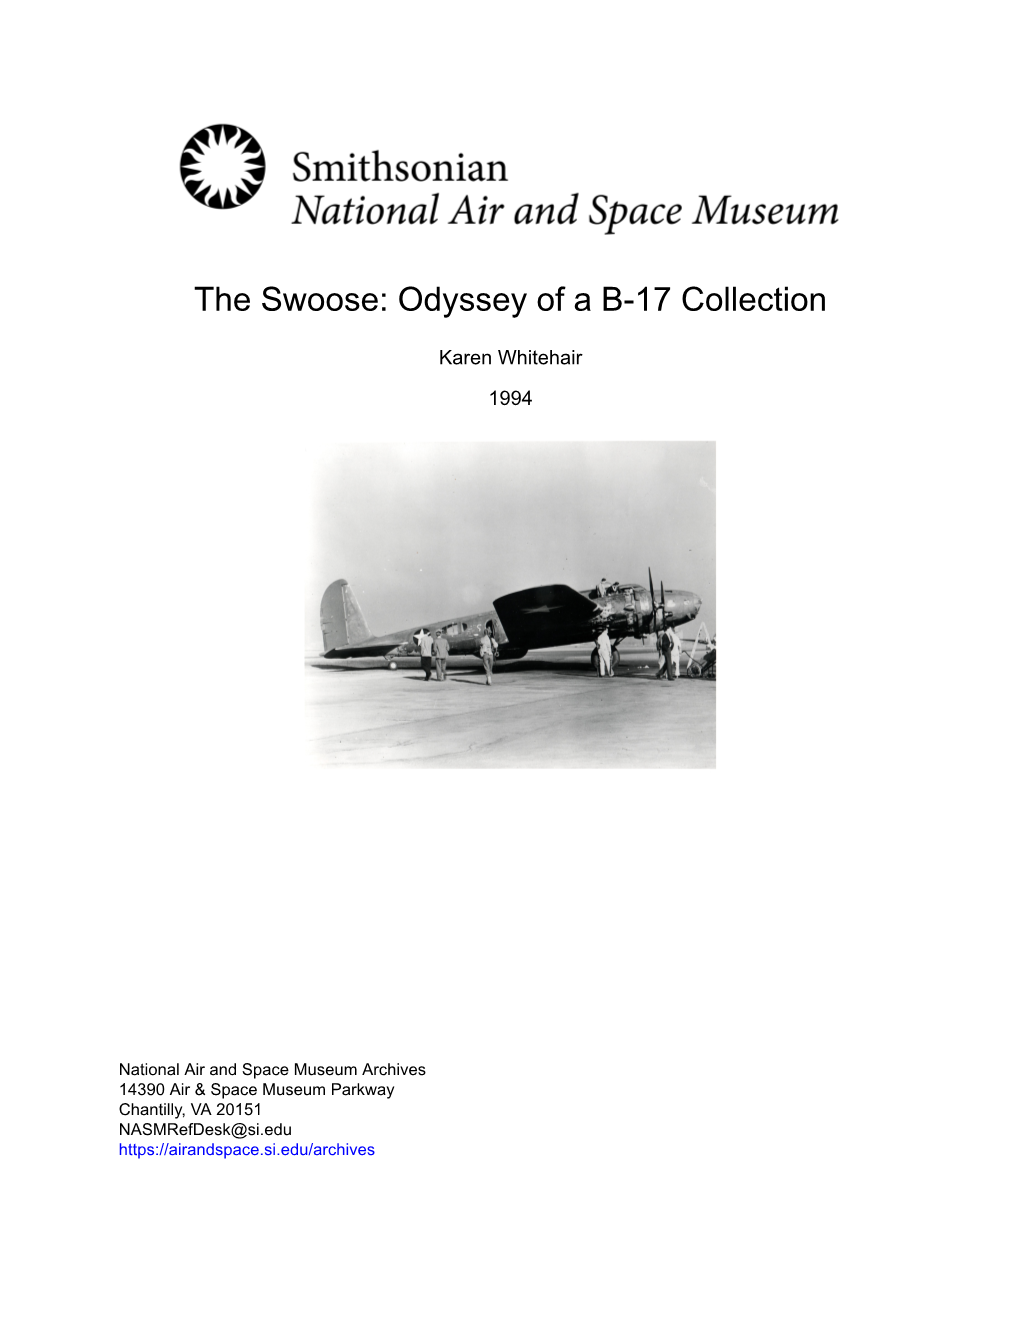 The Swoose: Odyssey of a B-17 Collection